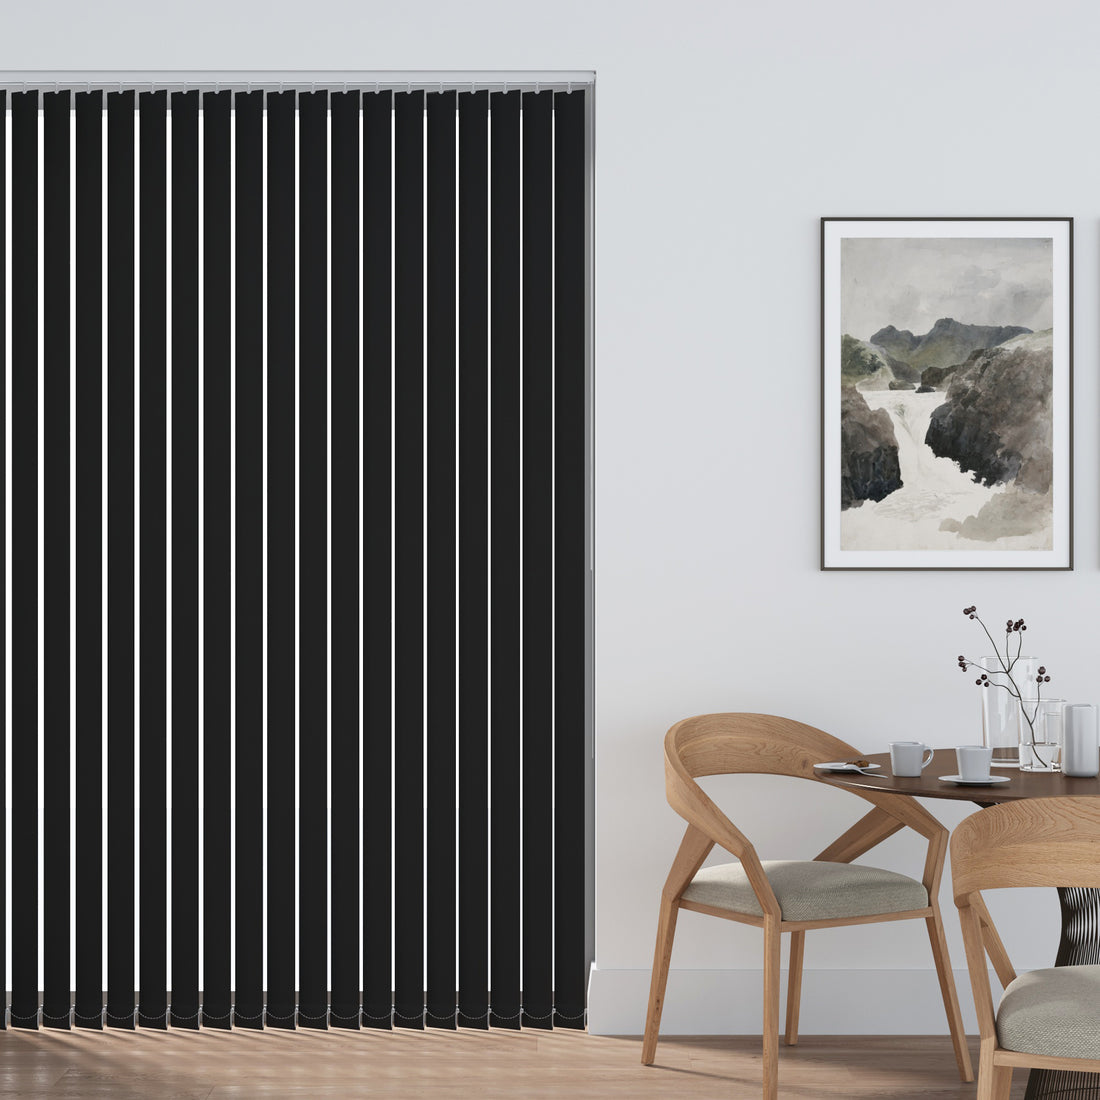 Feather Weave Black - Replacement Slats